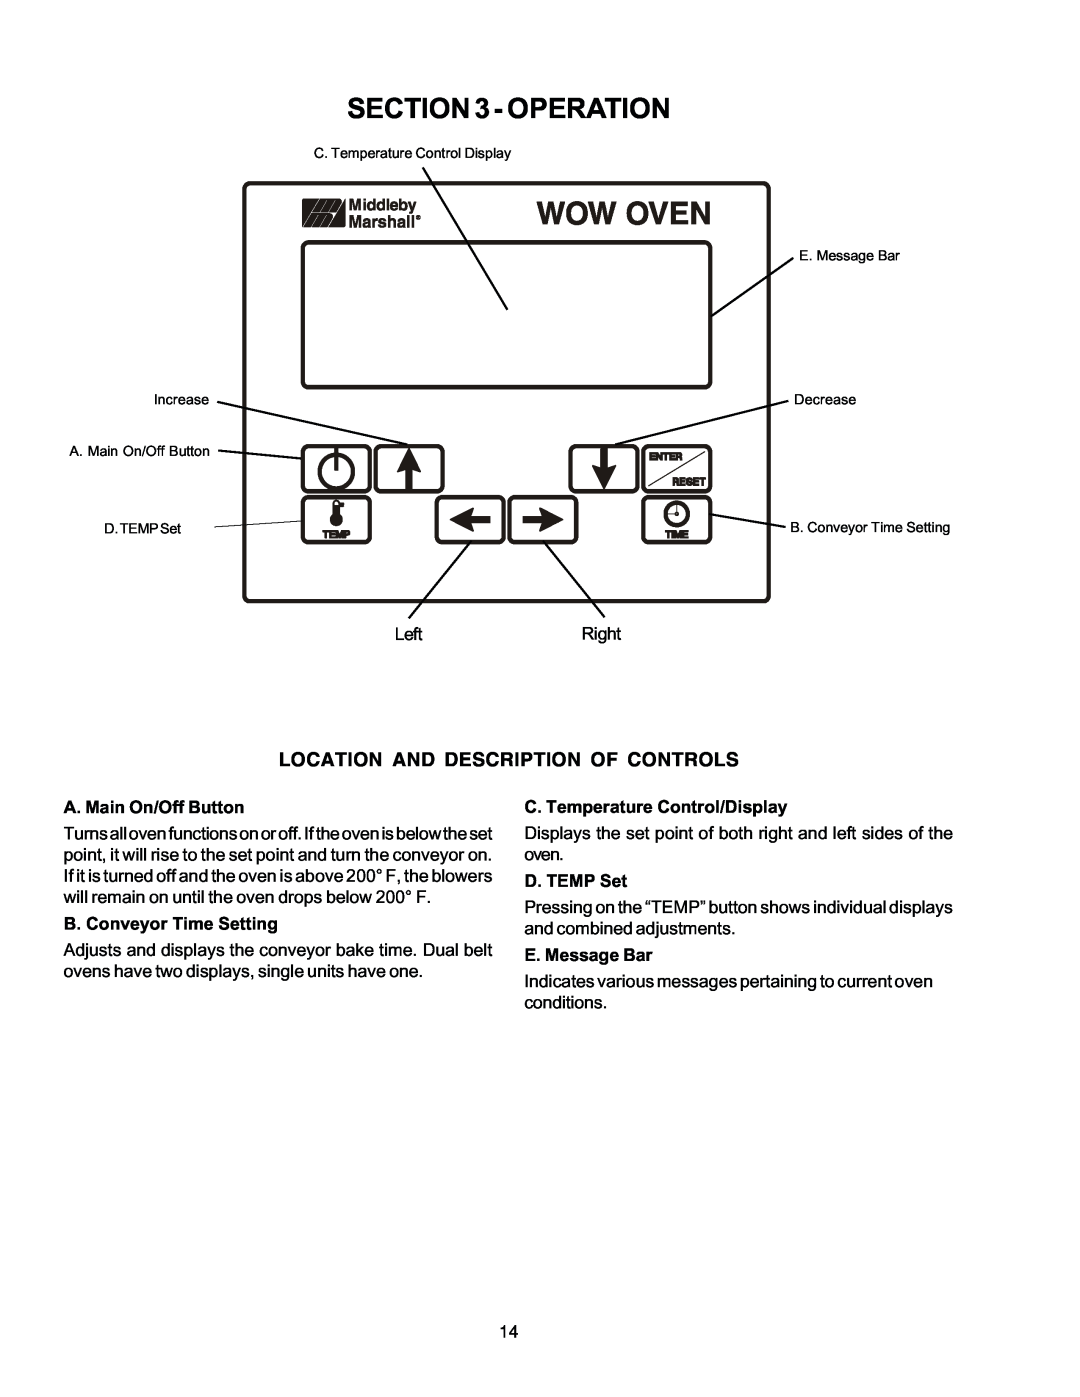 Middleby Cooking Systems Group PS870 Series manual Location And Description Of Controls, A. Main On/Off Button, D. TEMP Set 